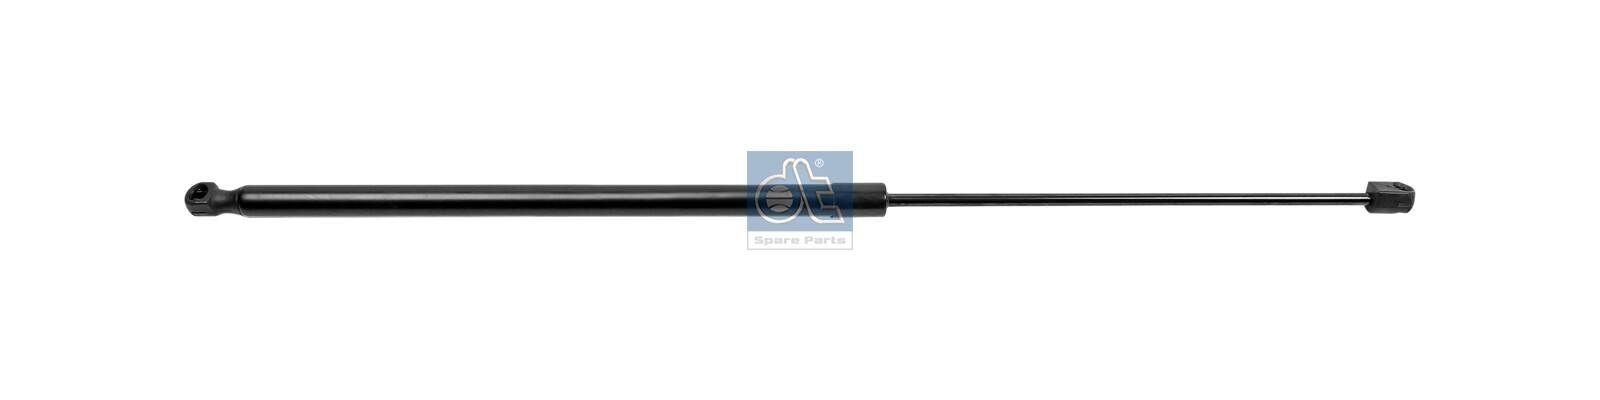 DT Spare Parts 310N, 705 mm Gas Spring 1.23372 buy